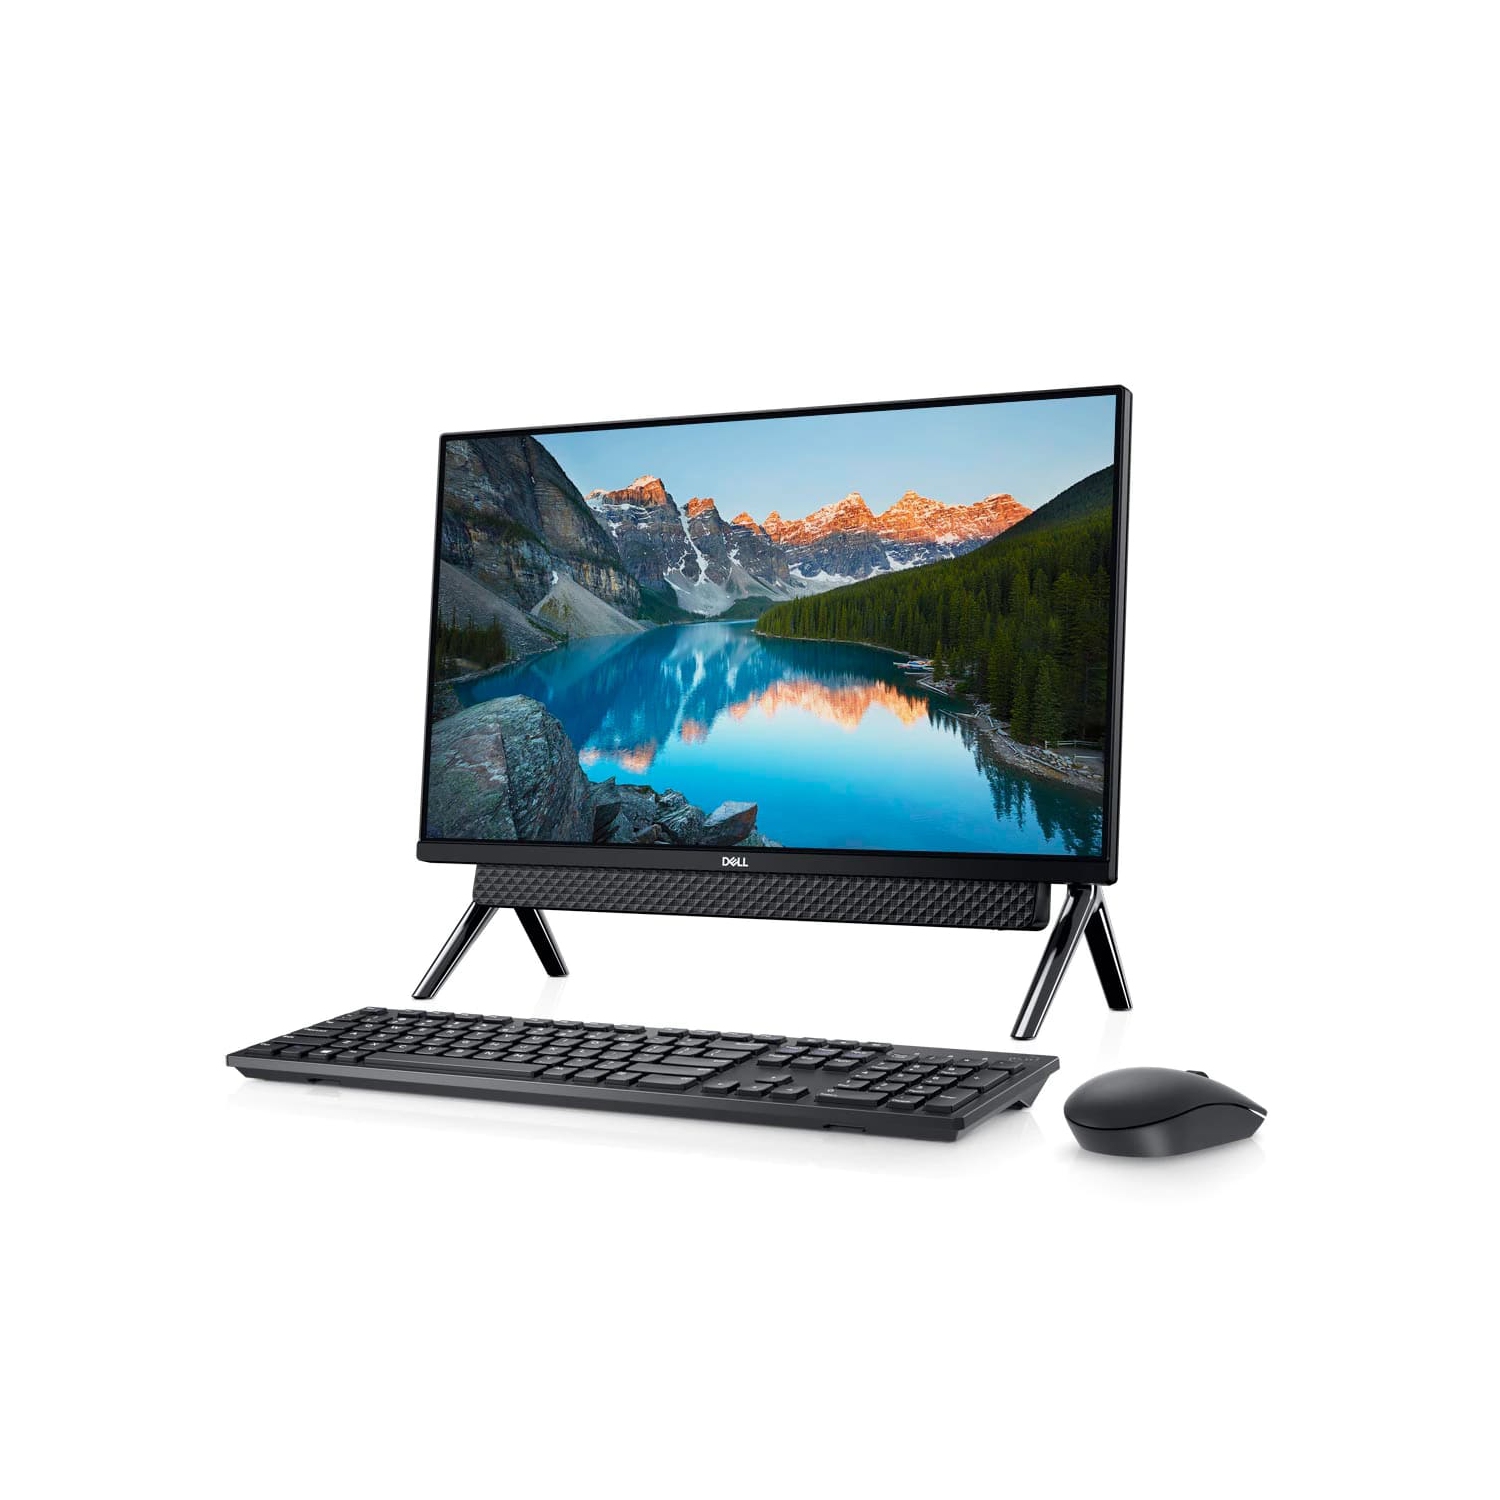 Refurbished (Excellent) - Dell Inspiron 24 5490 AIO (2019) | 24" FHD Touch | Core i3 - 256GB SSD - 8GB RAM | 2 Cores @ 4.1 GHz - 10th Gen CPU Certified Refurbished